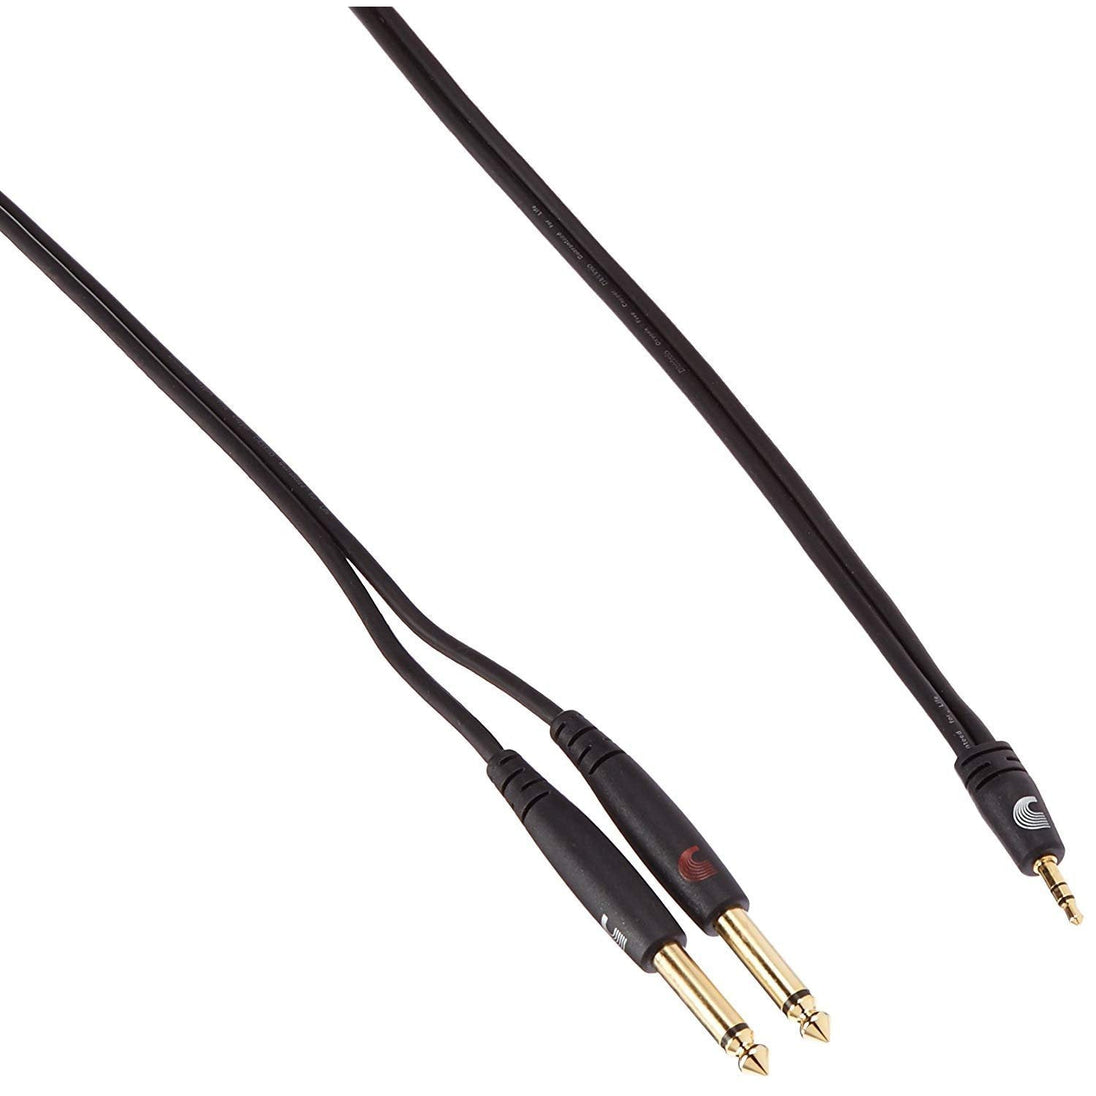 Planet Waves Custom Series Audio Cable 3.5mm to Dual 1/4", 6 feet